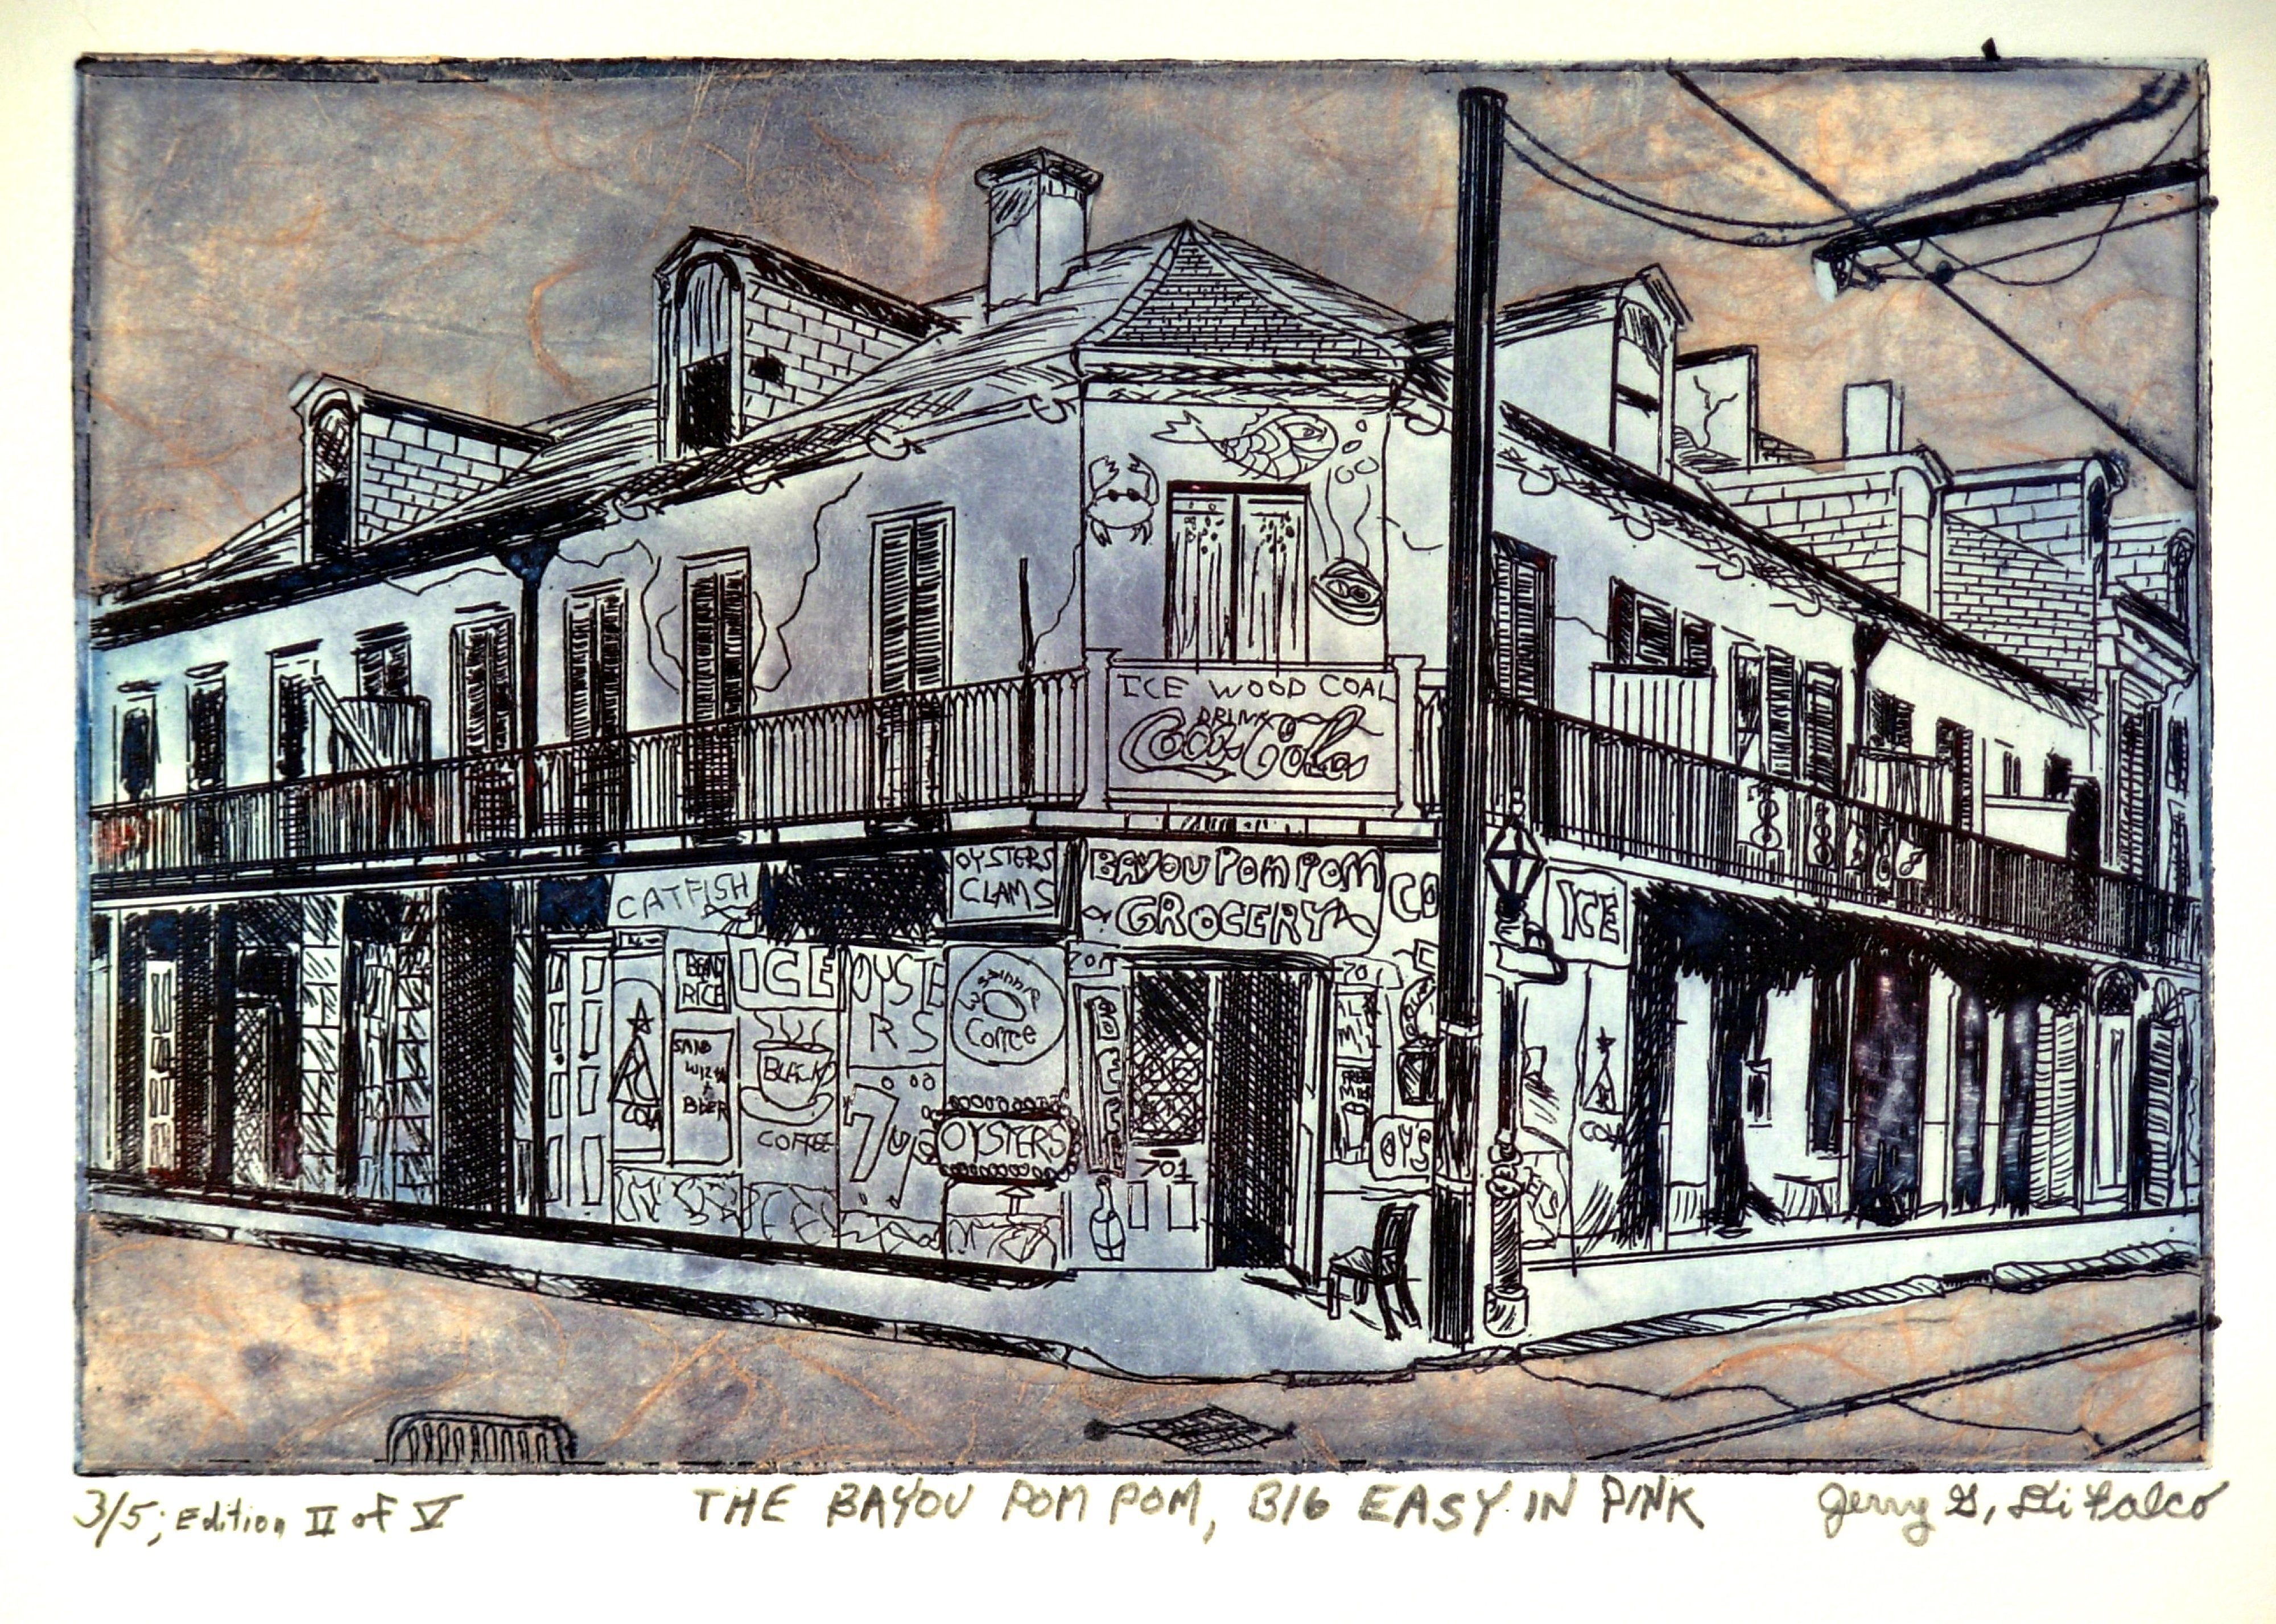 Jerry  Di Falco: 'THE BAYOU POM POM BIG EASY IN PINK', 2016 Etching, Cityscape. The title of this work is, THE BAYOU POMPOM BIG EASY IN PINK. Print Two of Five, and Edition ONE of FIVE. Media includes four colors of oil based, Charbonnel brand etching inks, RivesBFK white paper, and mulberry bark paper from Thailand. The studio techniques employed include Intaglio and Chine ...